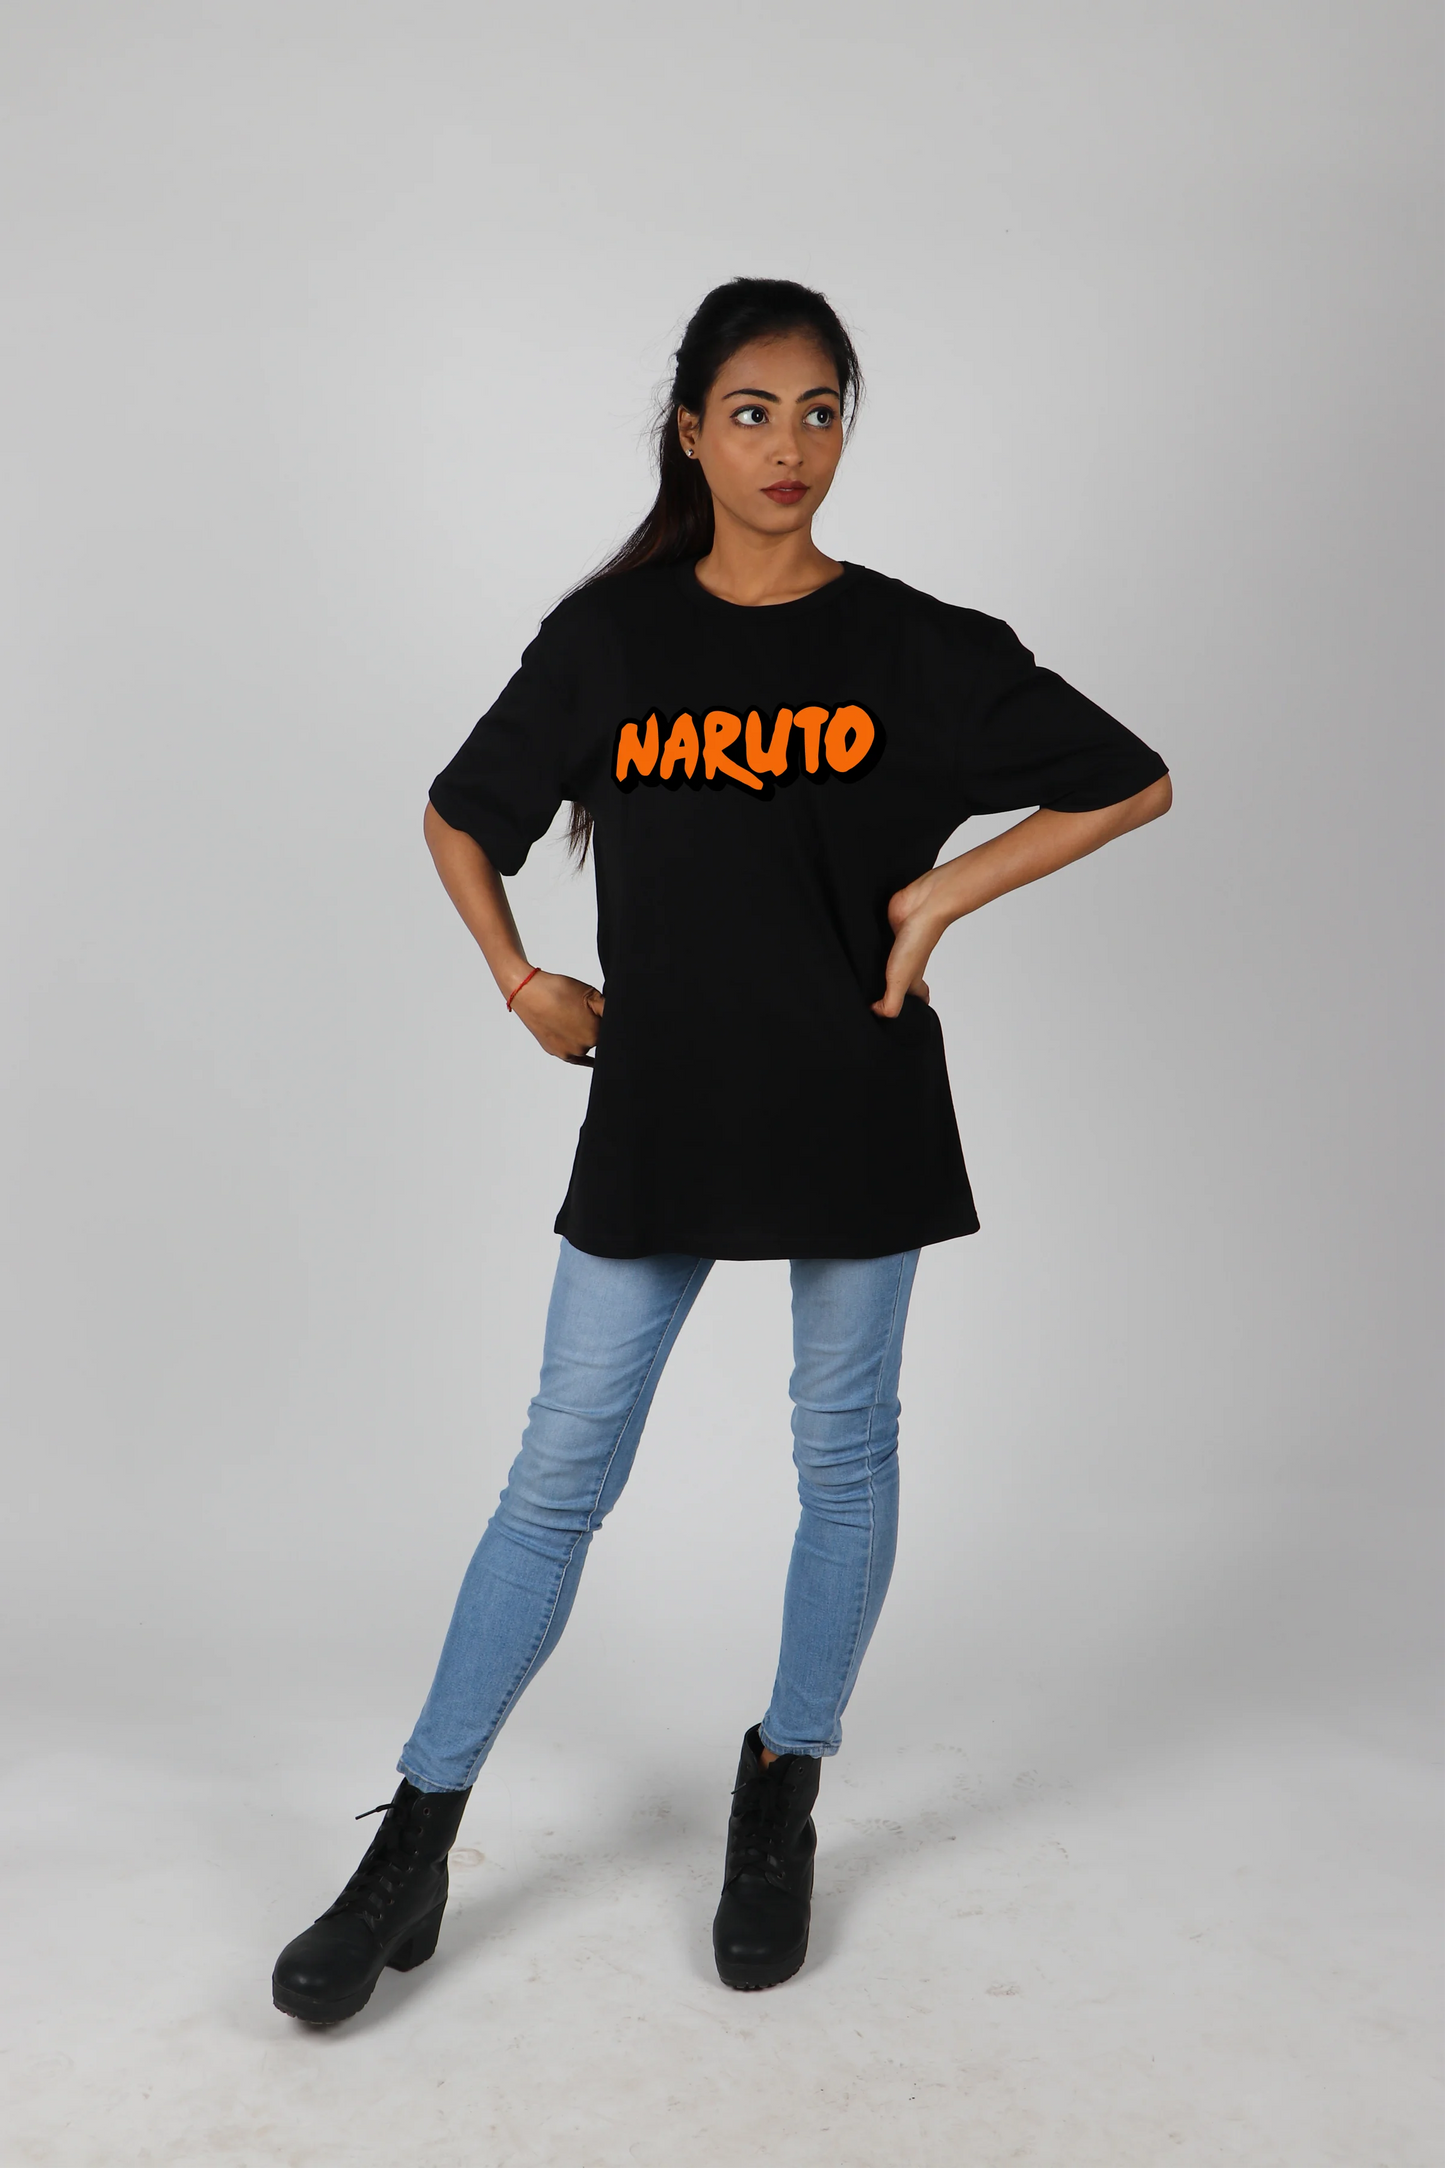 Channel confidence and ninja spirit with this empowering Naruto T-shirt designed exclusively for women.